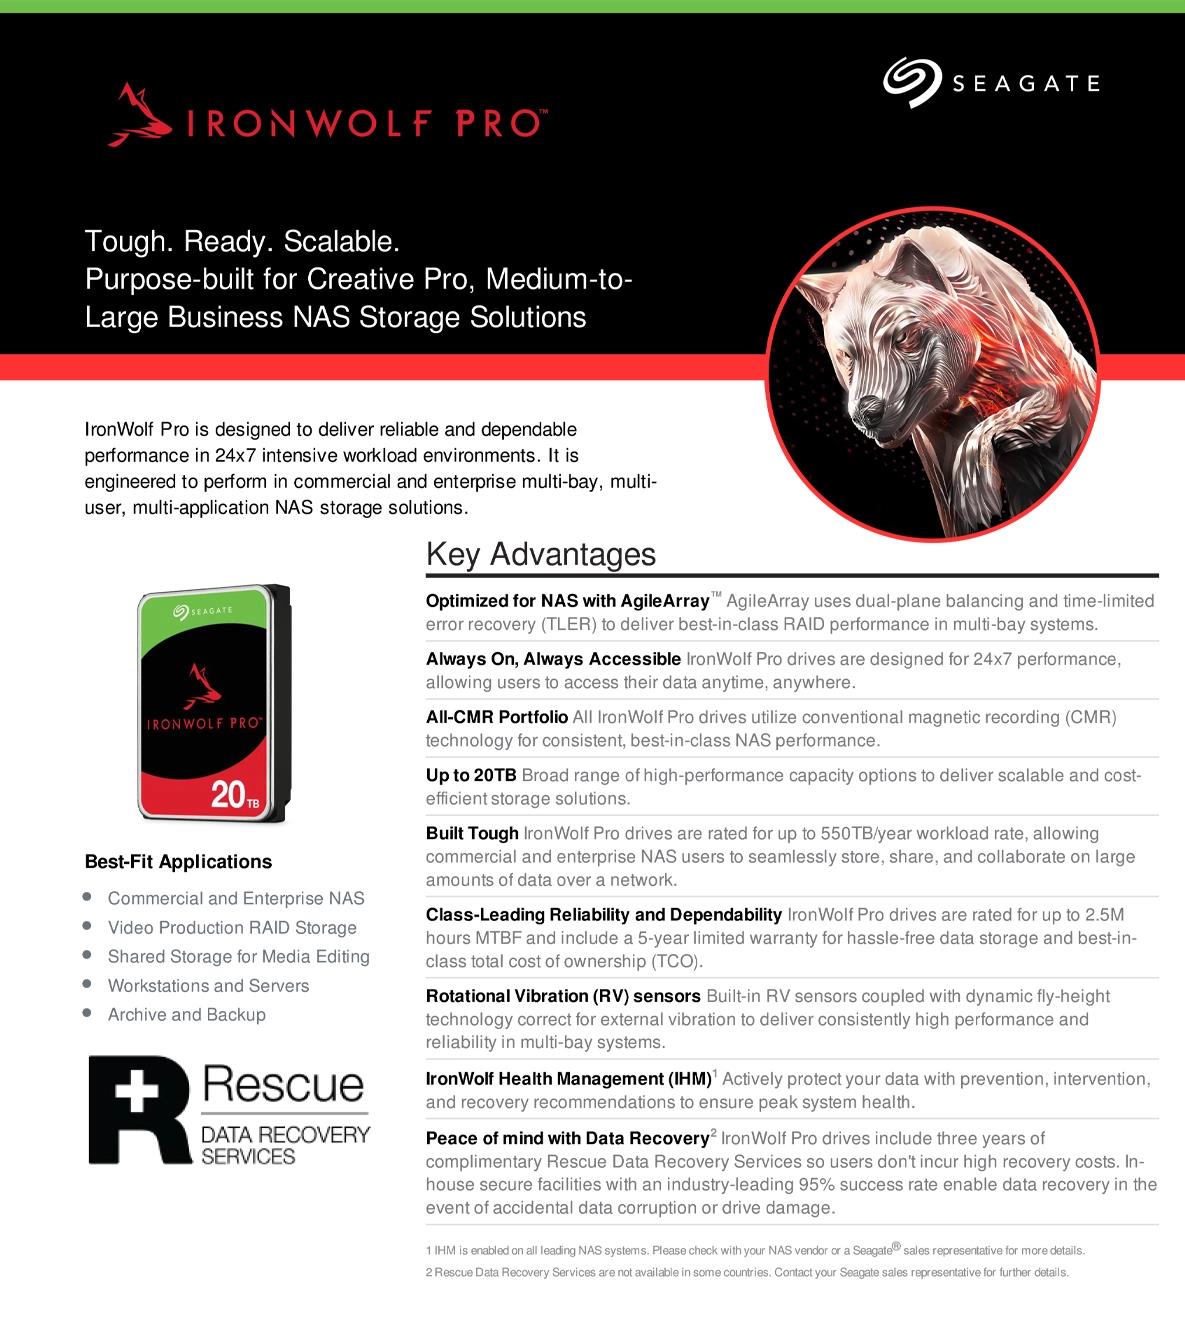 A large marketing image providing additional information about the product Seagate IronWolf Pro 3.5" NAS HDD - 20TB 256MB - Additional alt info not provided